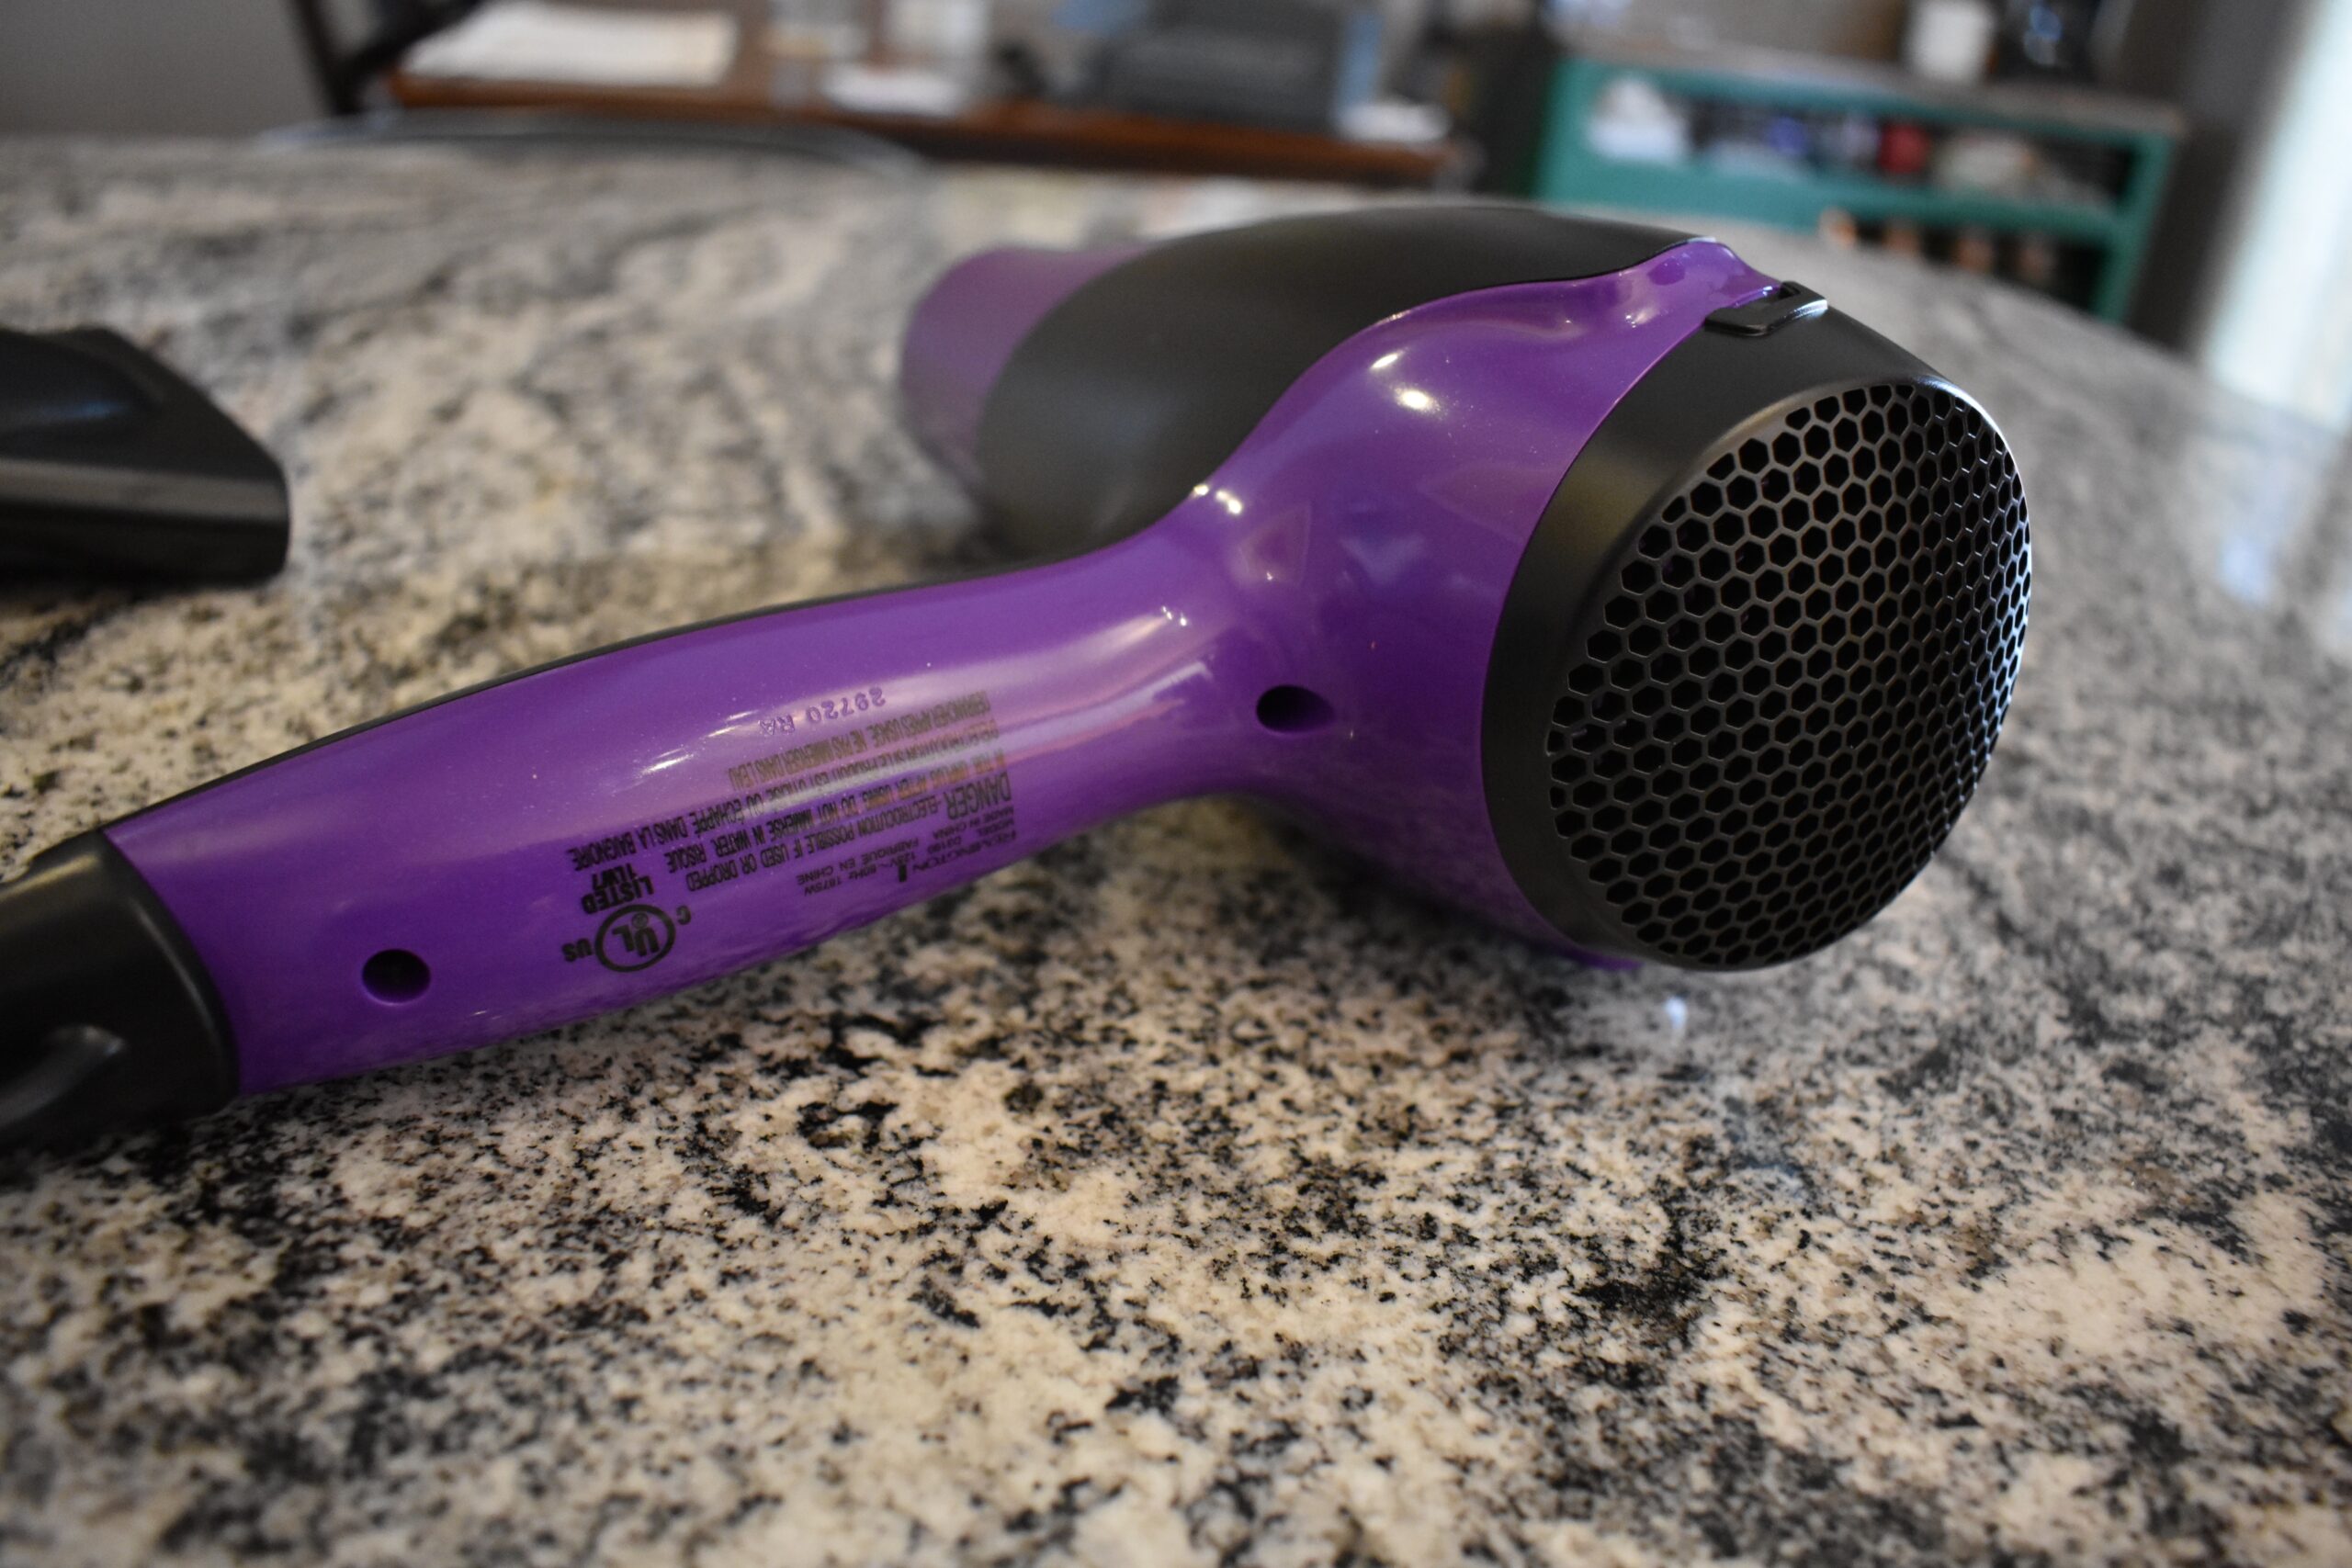 Angled shot of the Remington damage control hair dryer